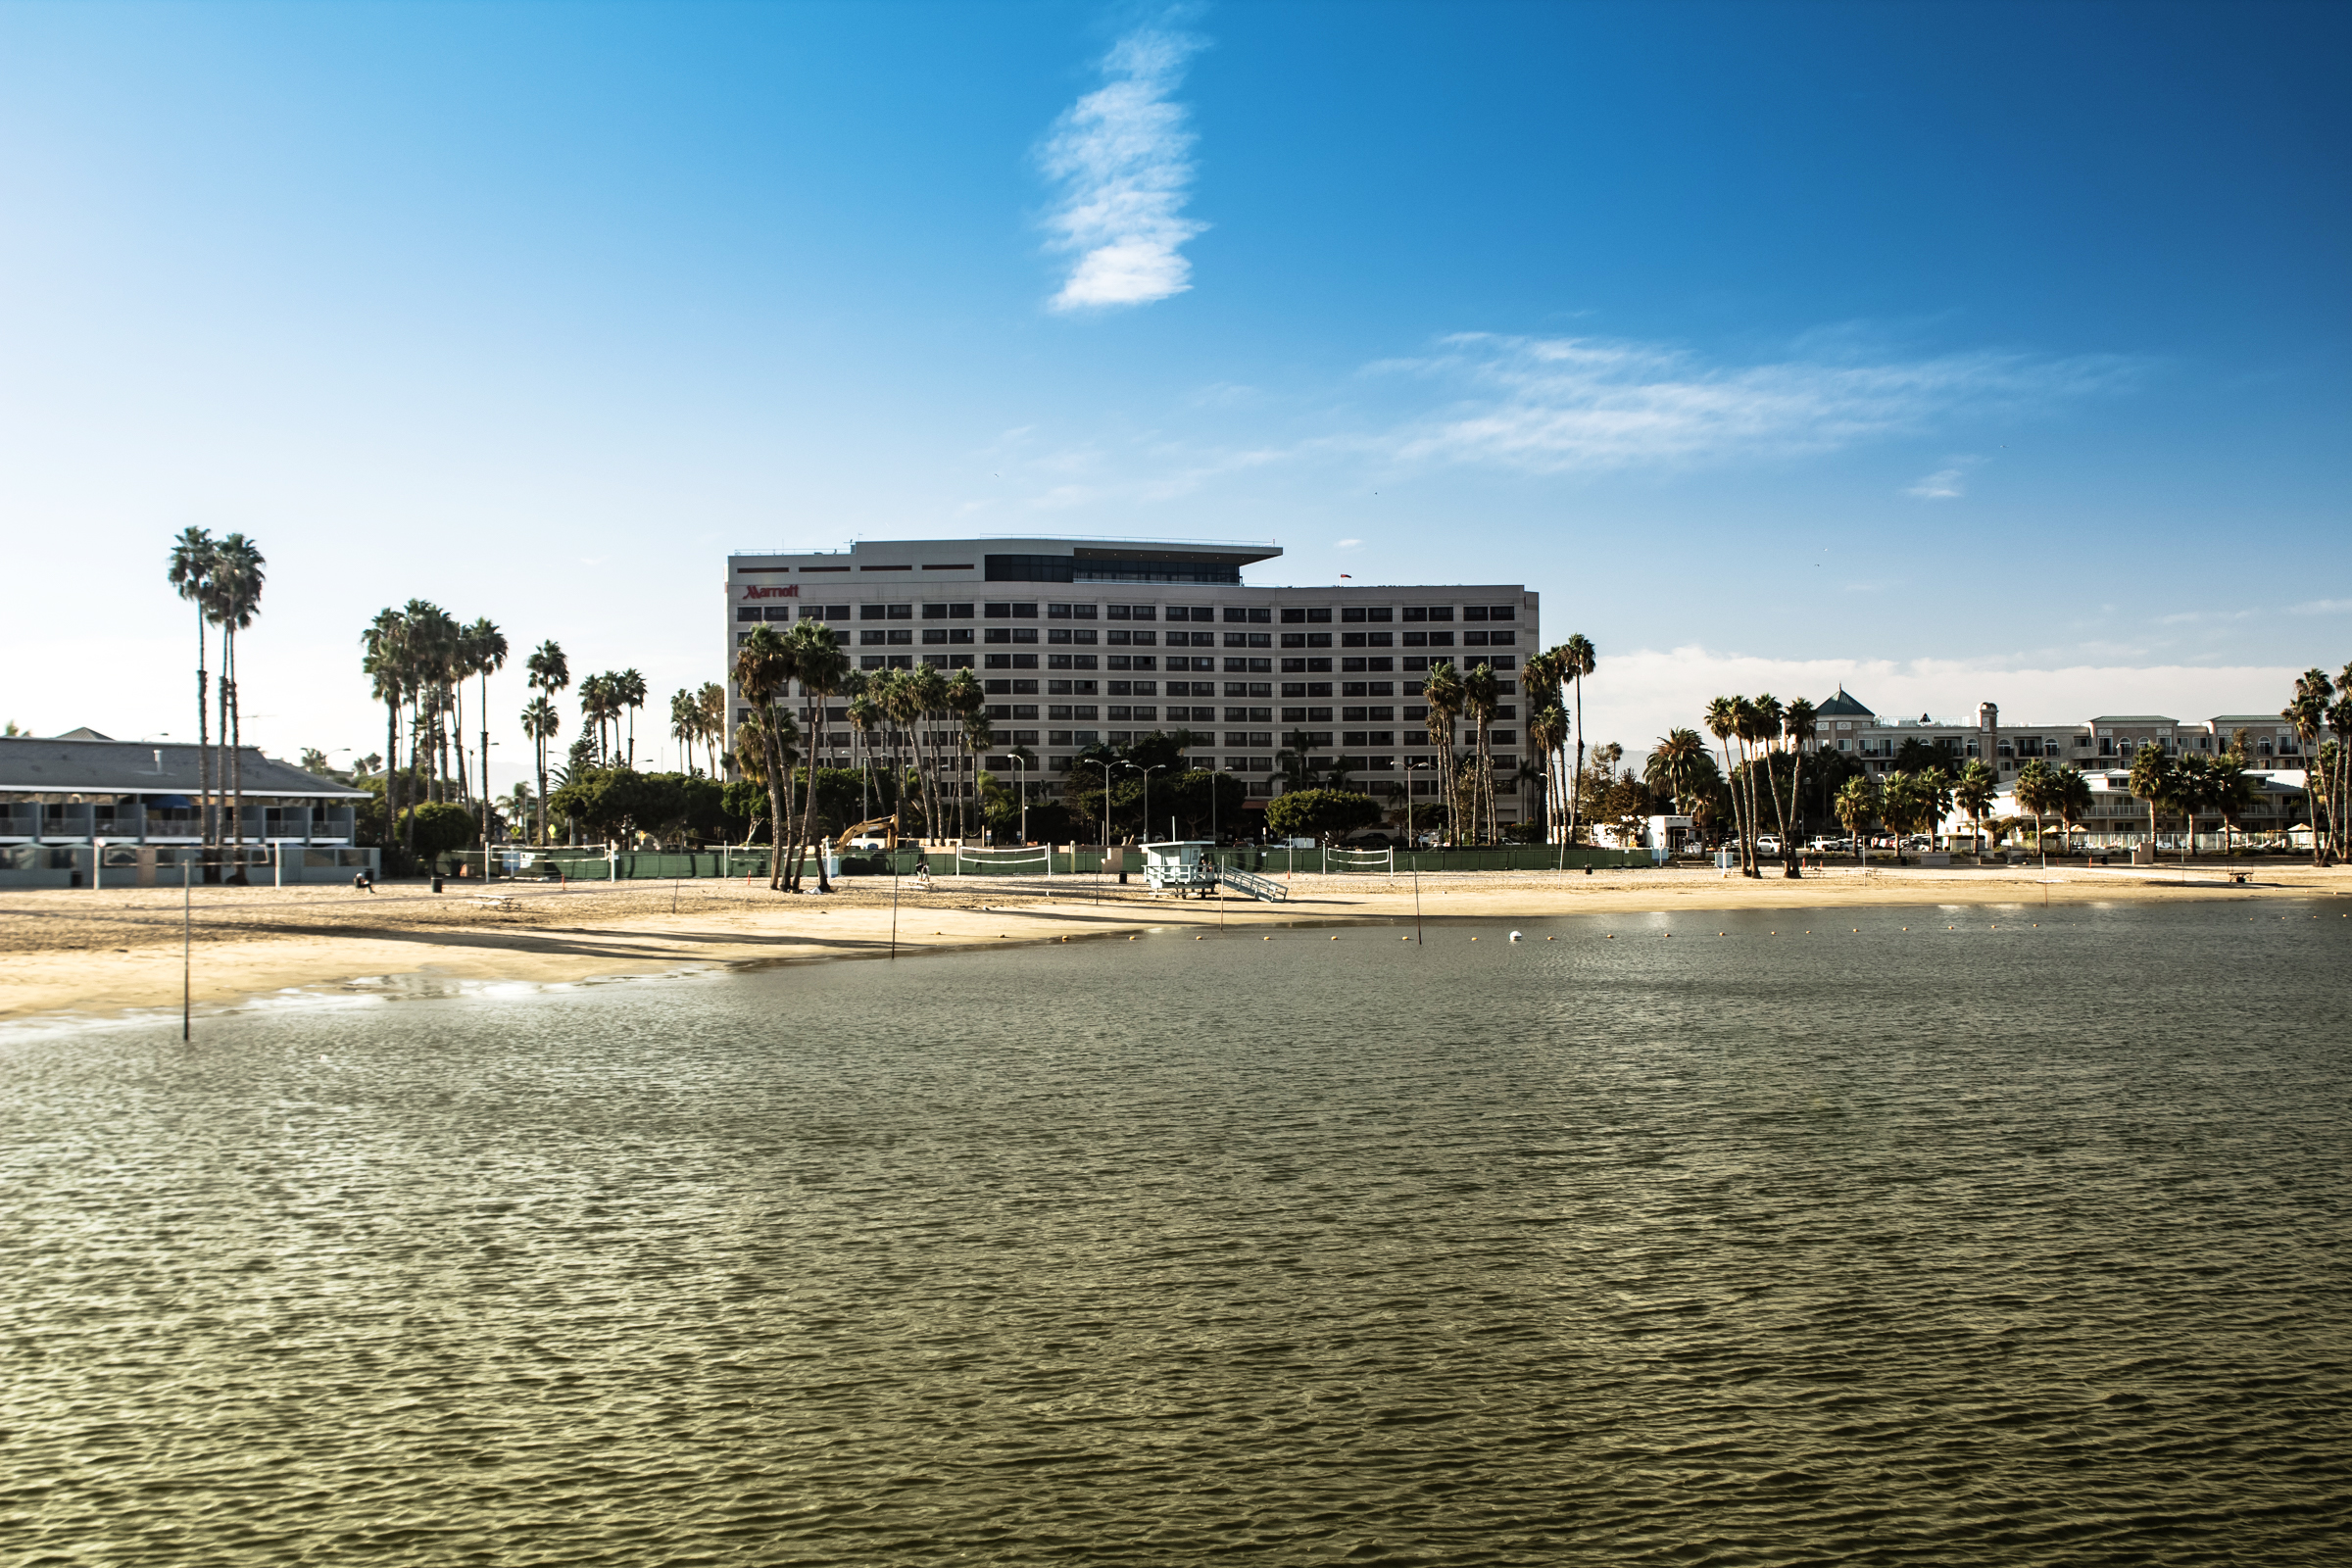 view of Marriott hotel building from the beach and sea